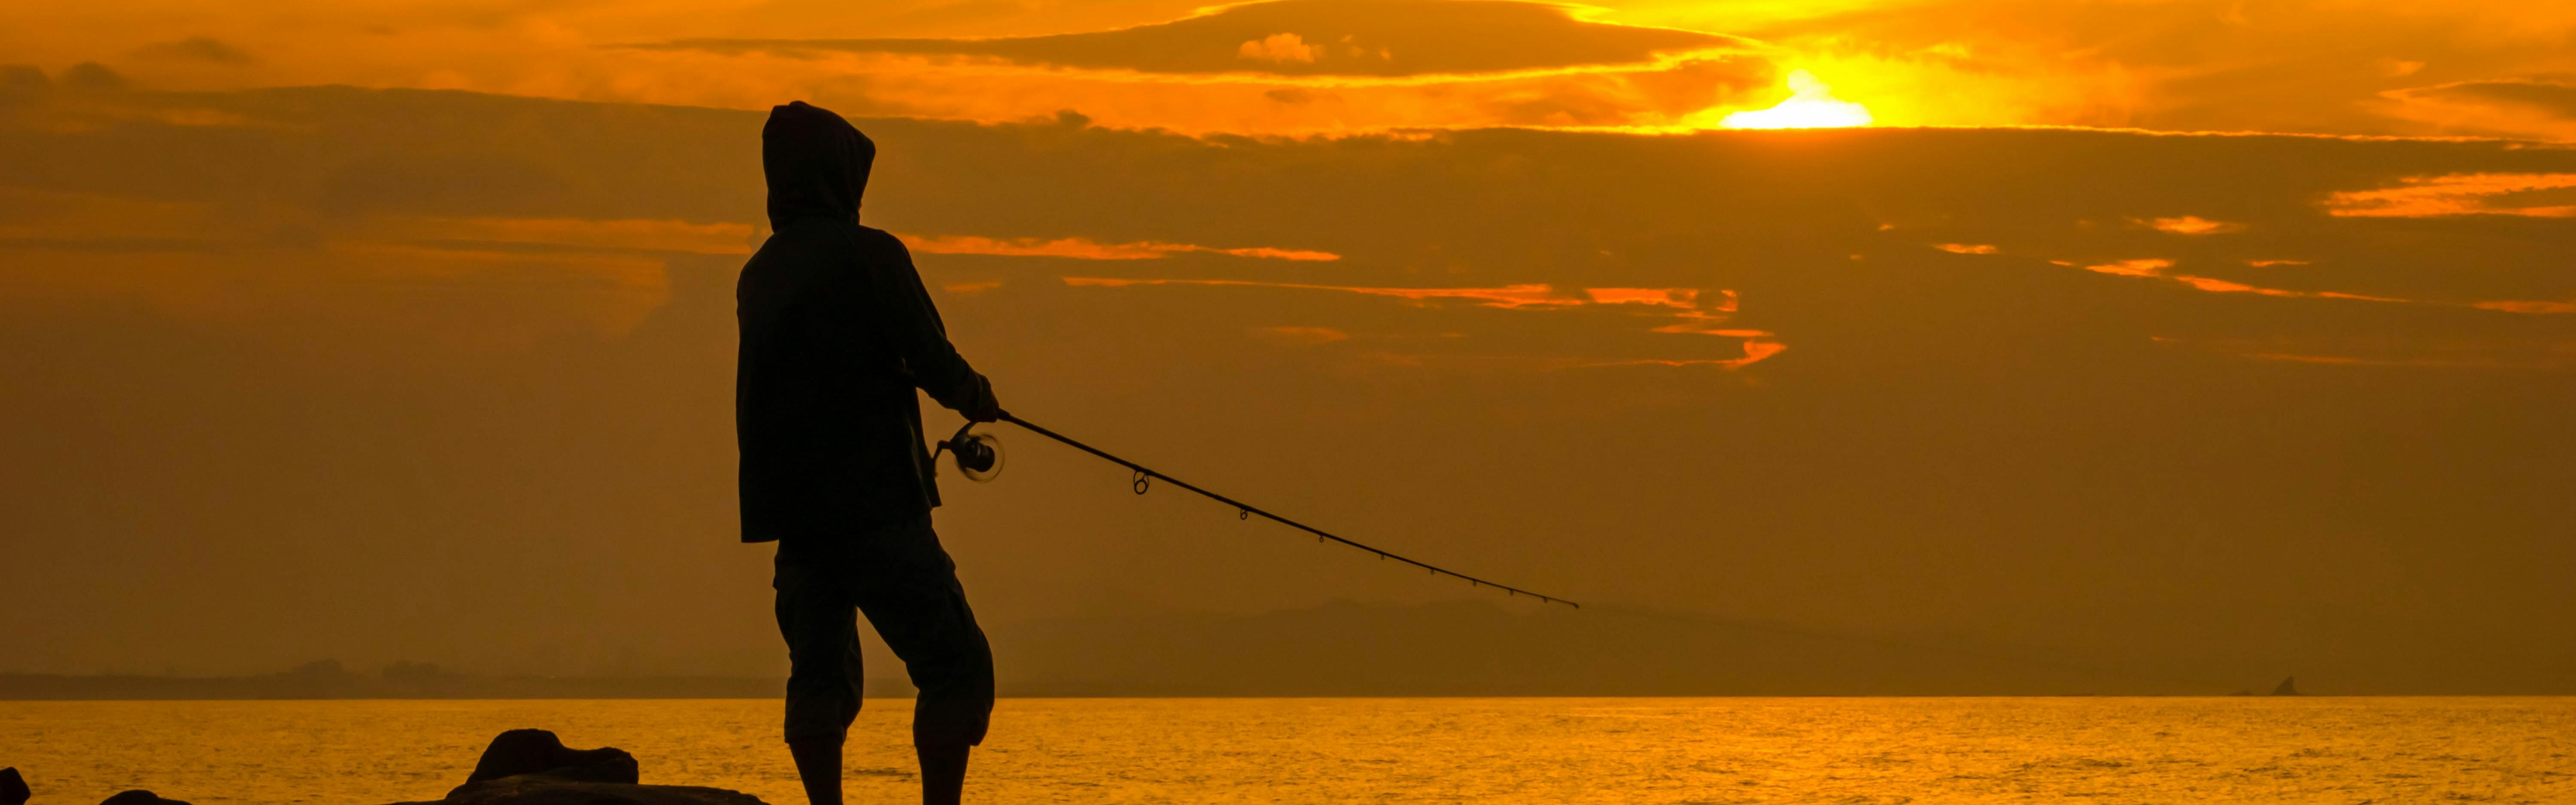 A silhouette of a man fishing backdropped by a glowing, orange sunrise. 